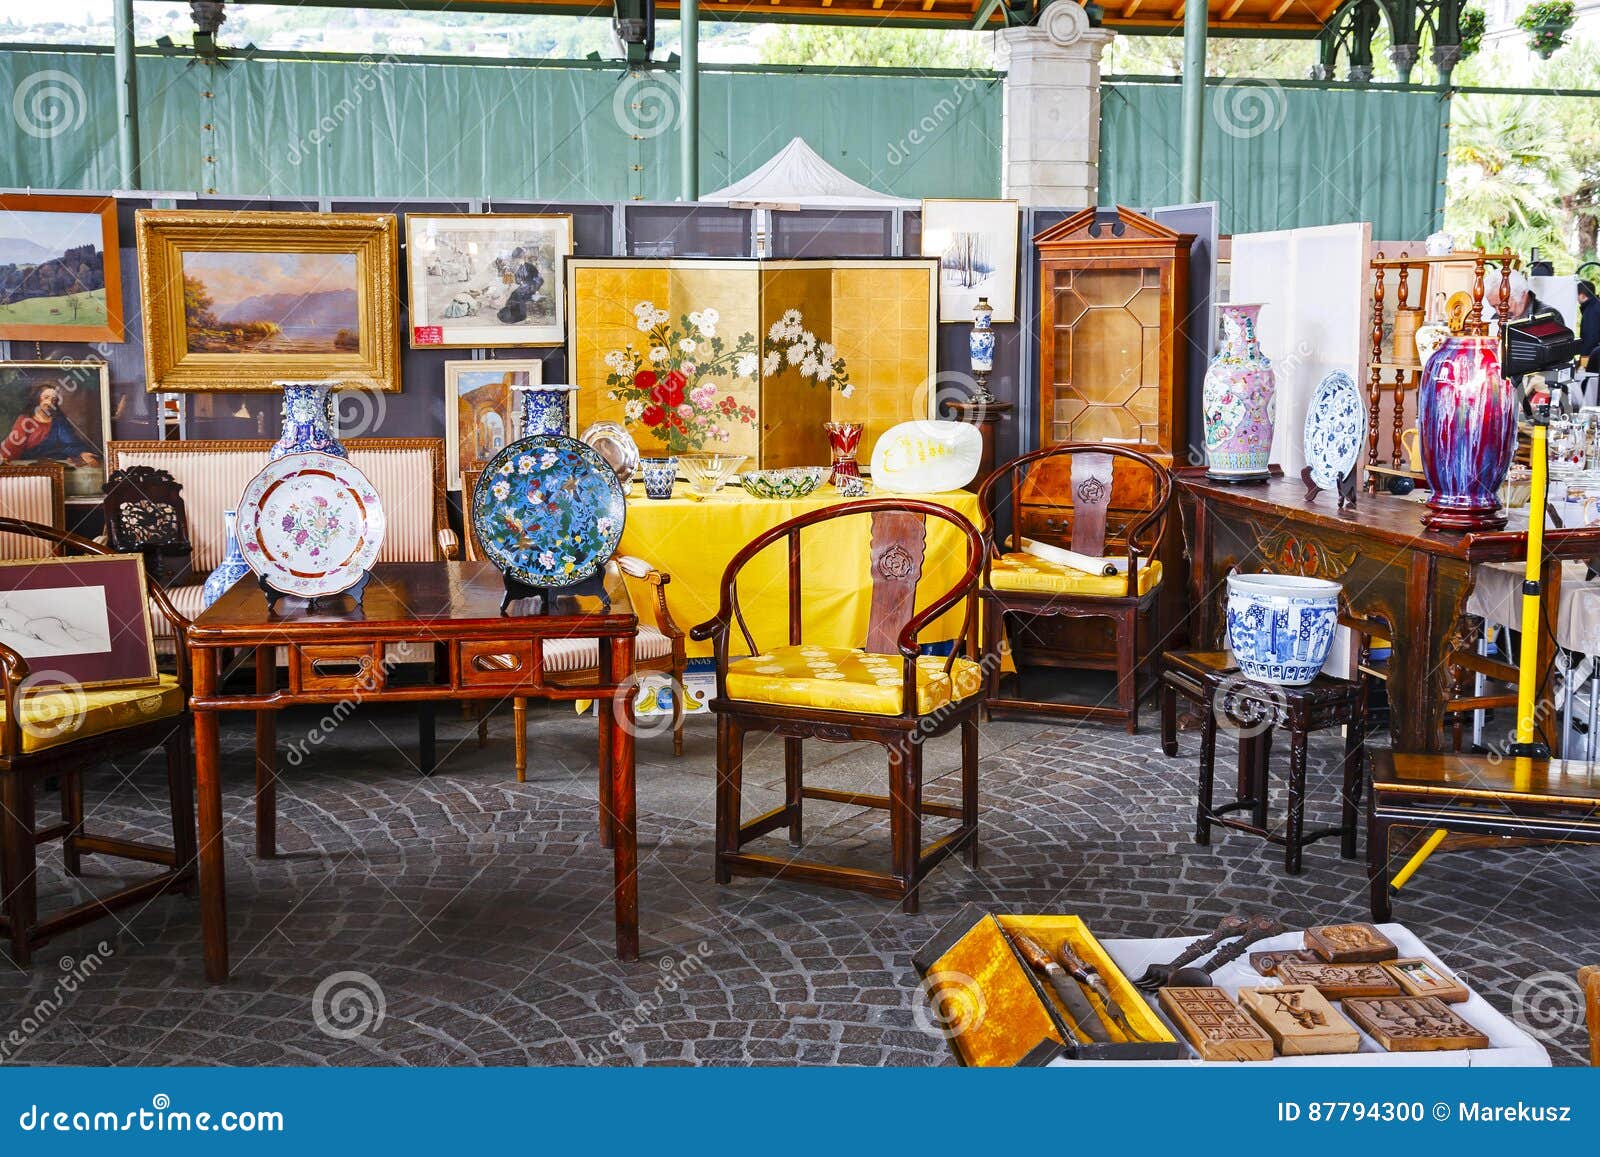 Furniture And Paintings On Sale At Antiques Market Editorial Image